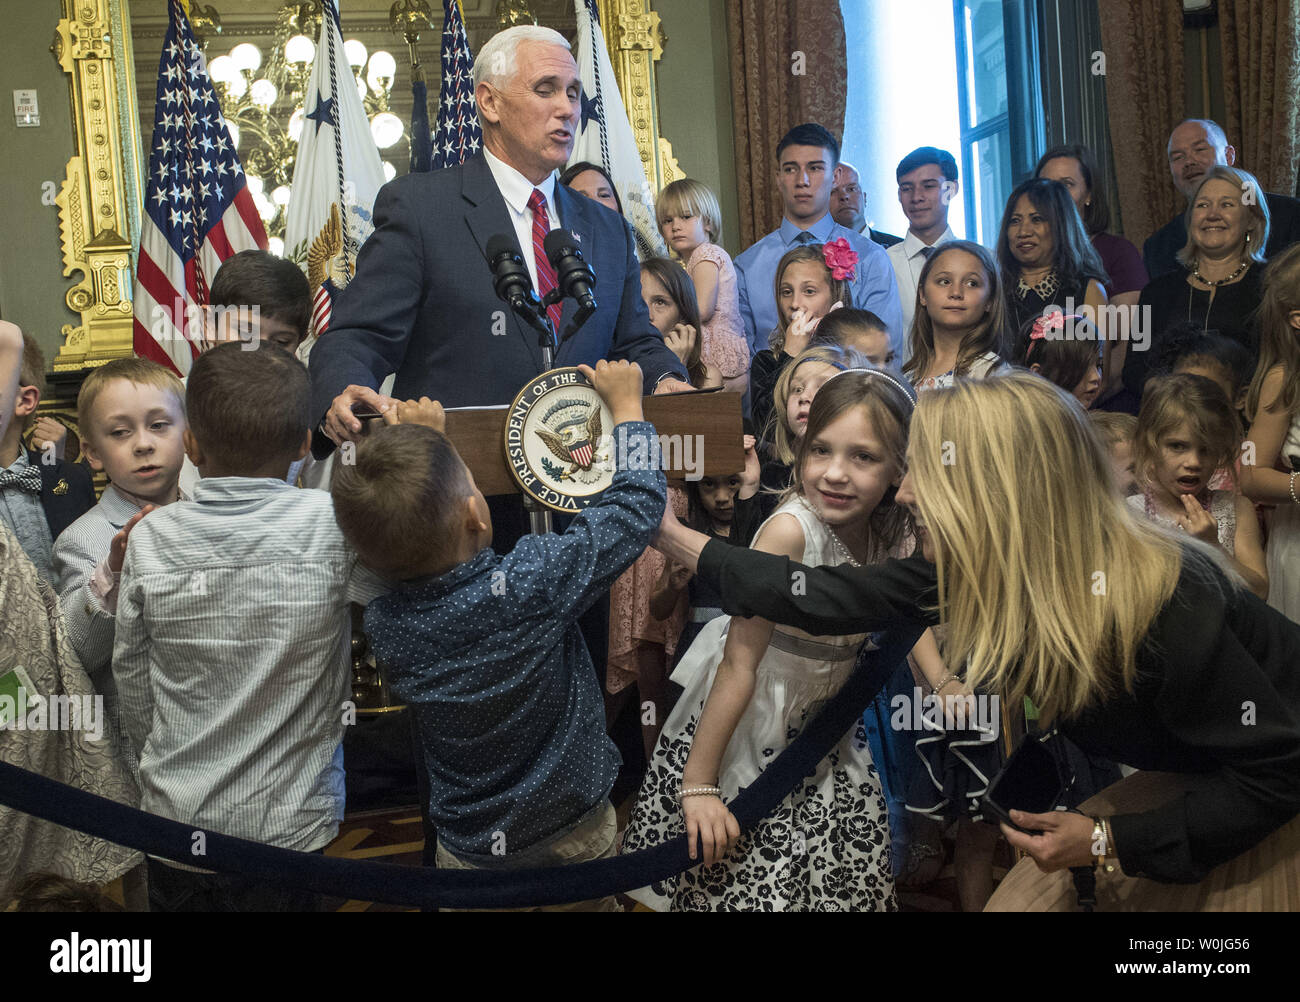 A child attempts to take the seal off of the lecture as Vice President Mike Pence delivers remarks to military families at an event recognizing National Military Appreciation Month and National Military Spouse Appreciation Day, in the Eisenhower Executive Office Building in Washington, D.C. on May 9, 2017. Photo by Kevin Dietsch/UPI Stock Photo